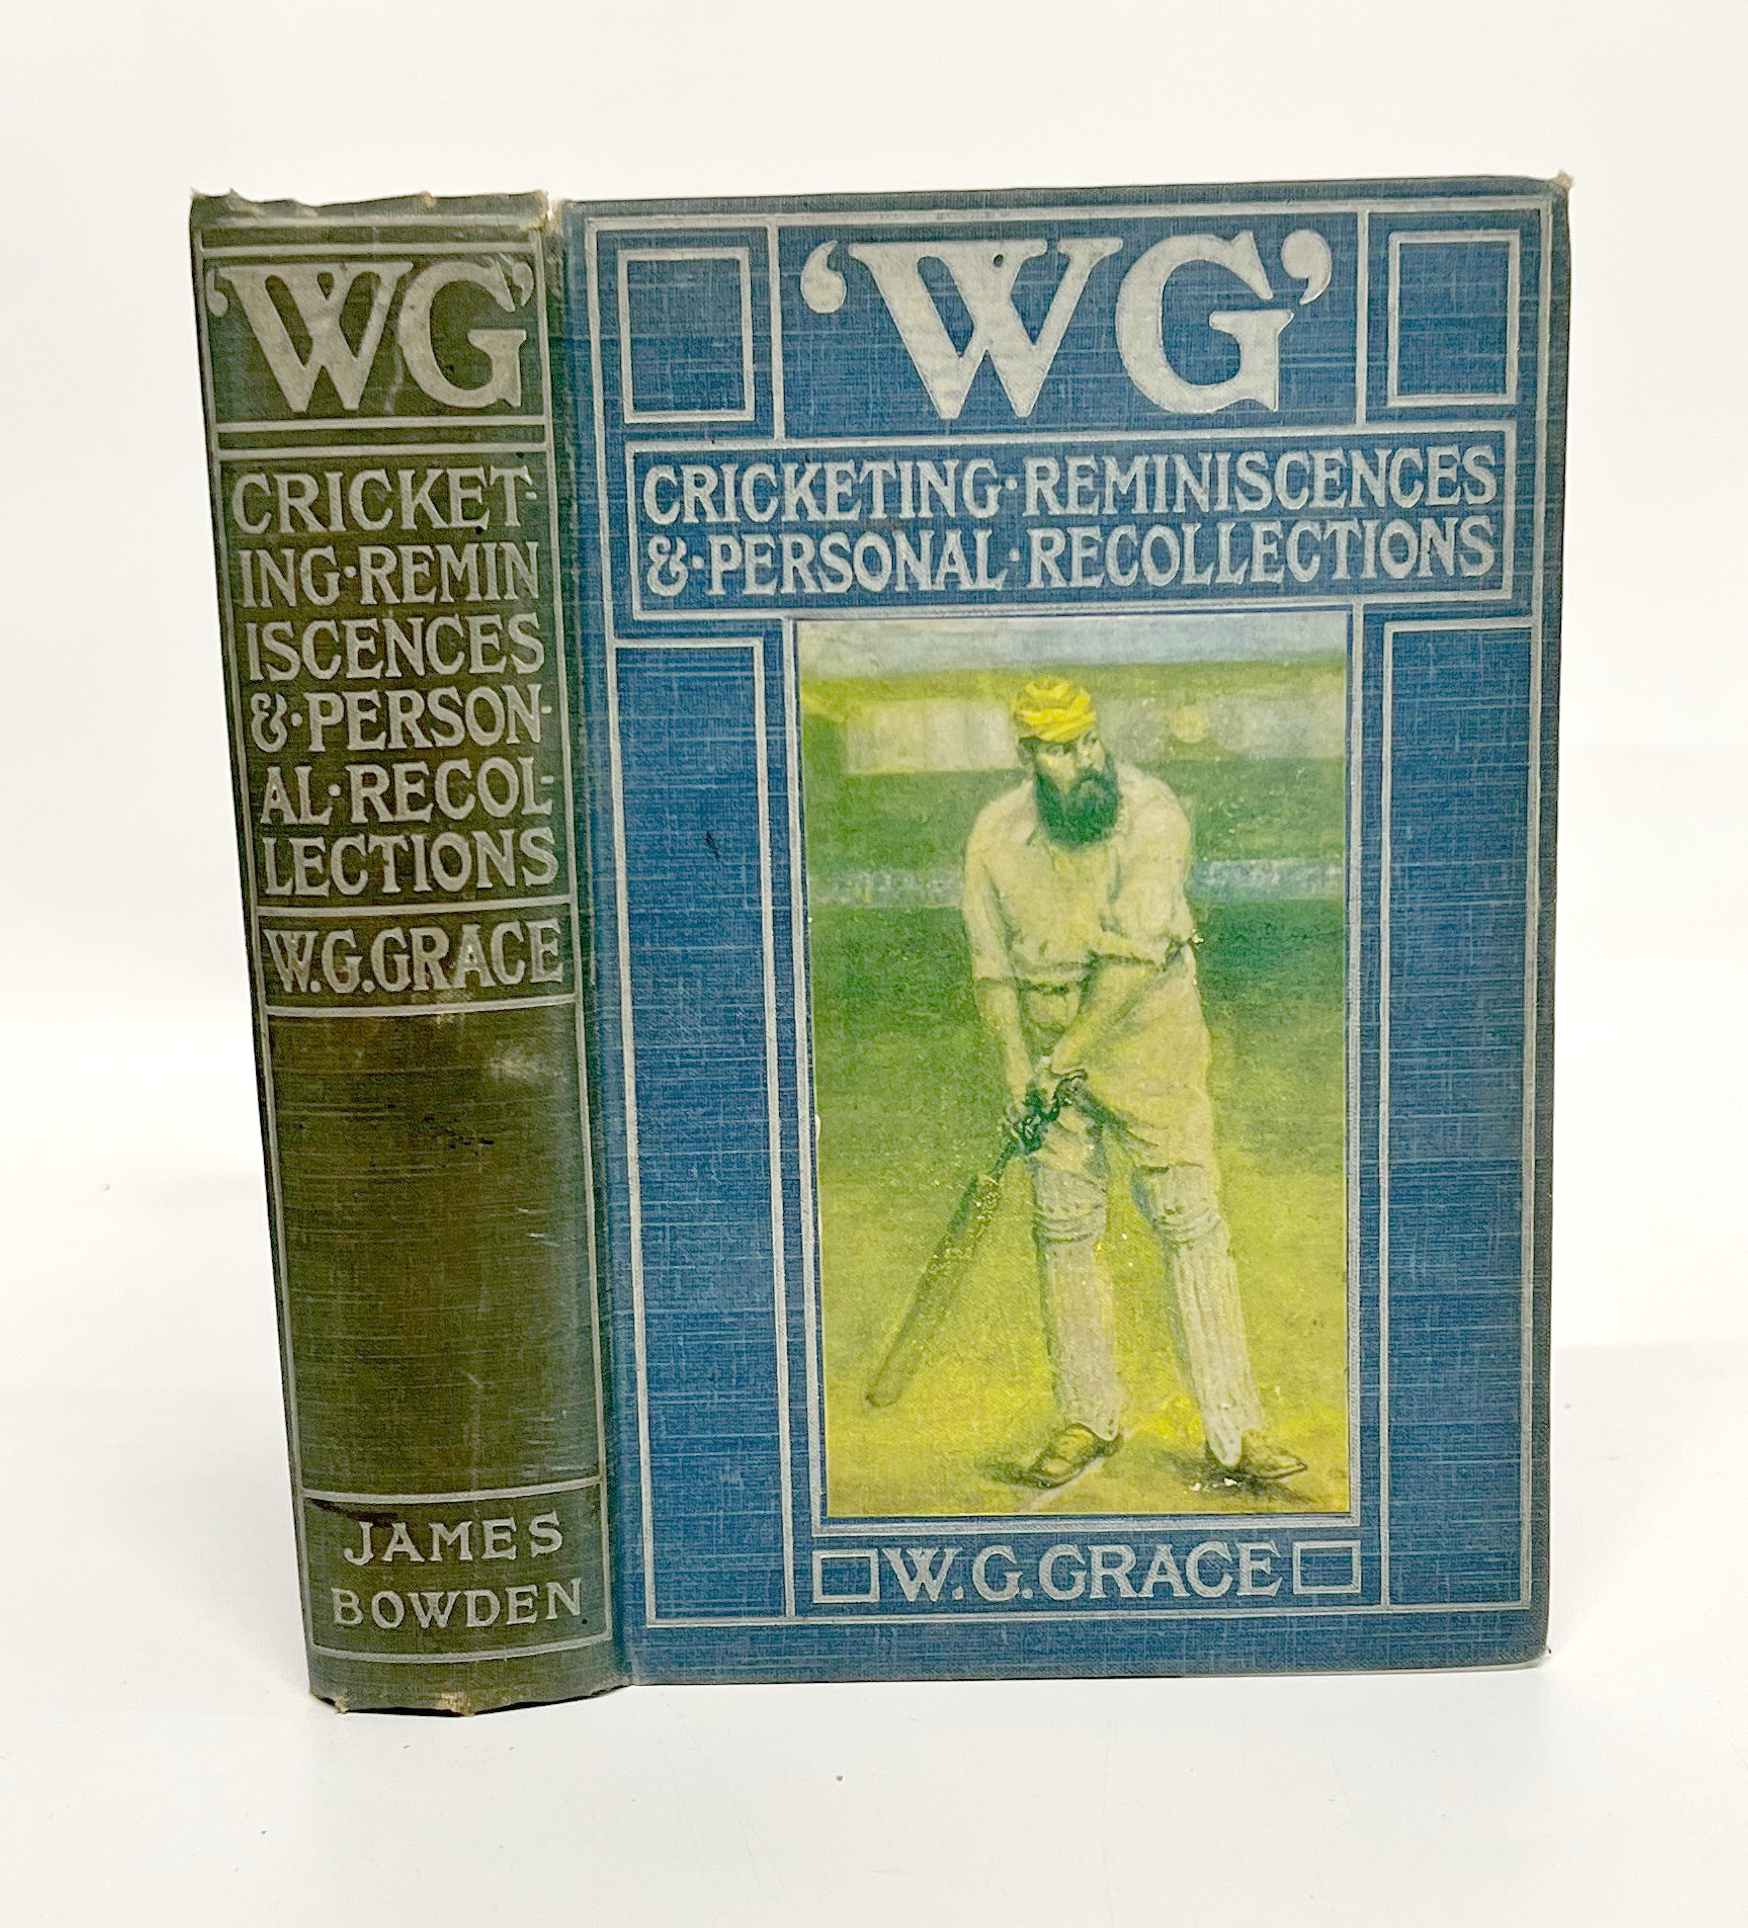 W G Grace Cricketing Reminiscences & Personal Recollections - James Bowden 1899 book, 1st edition,